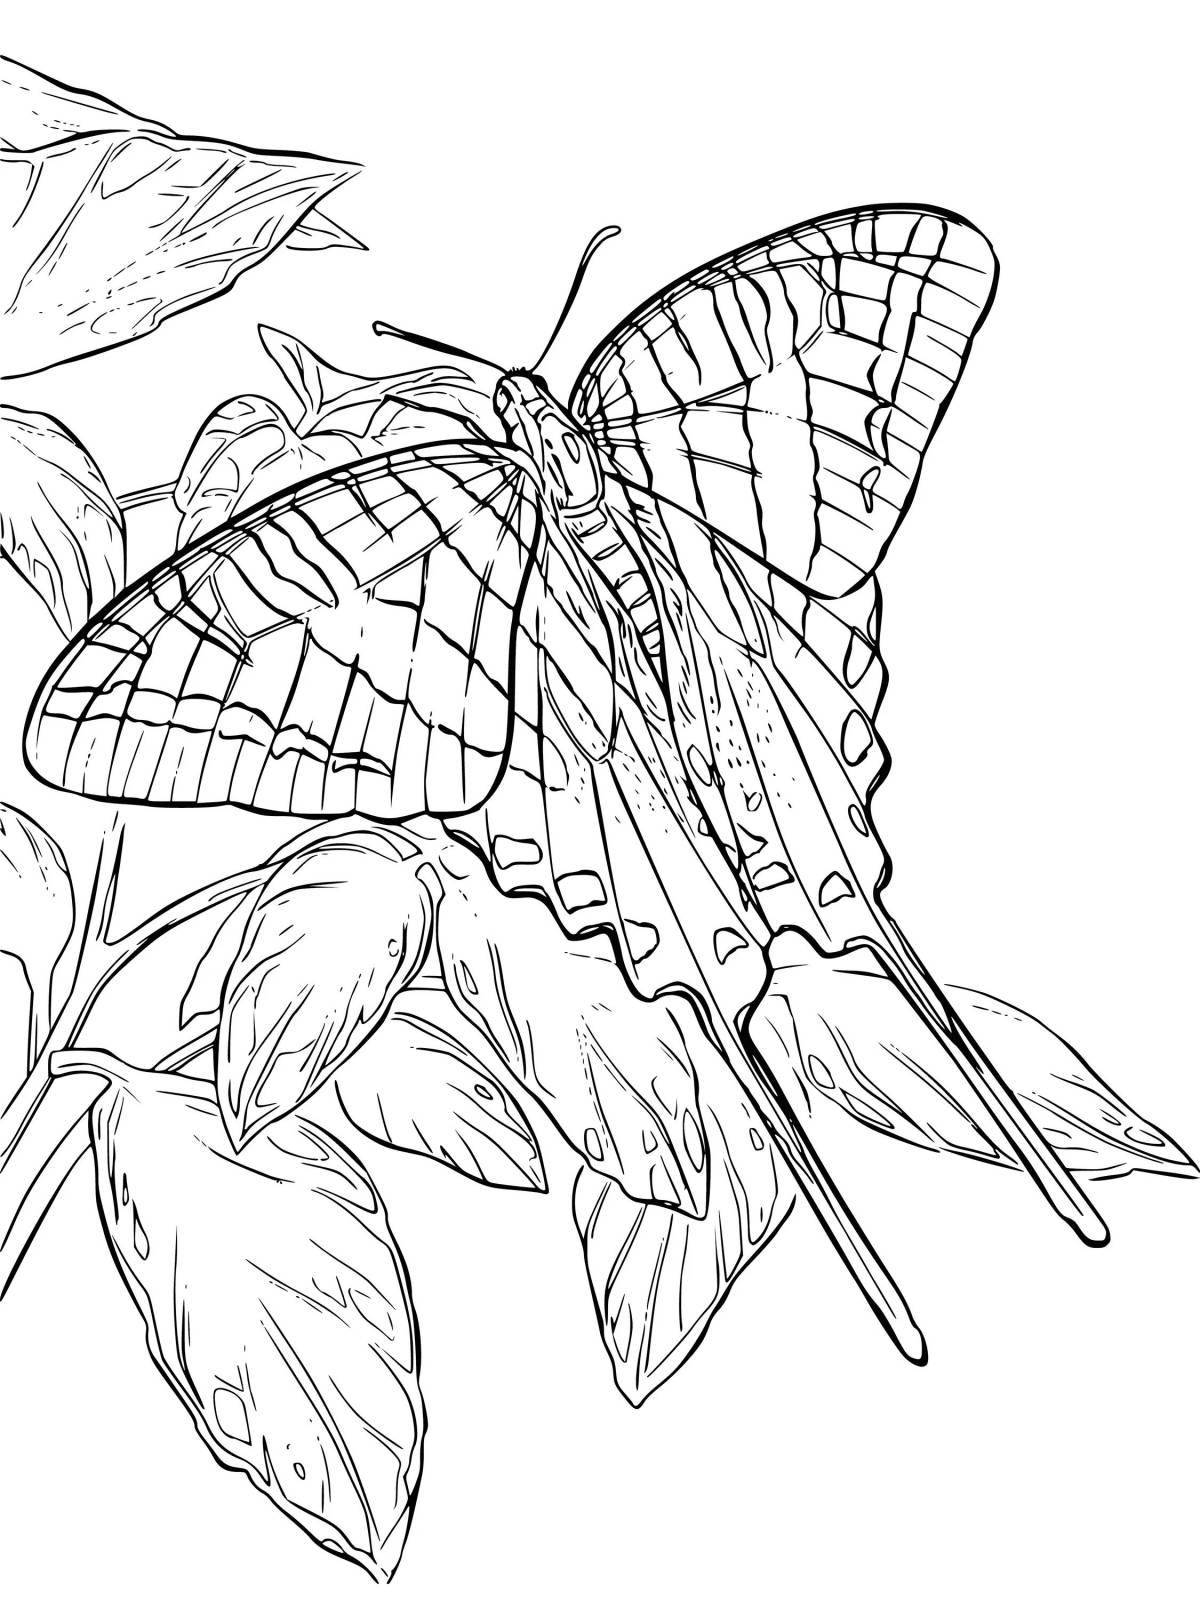 Coloring page elegant butterfly